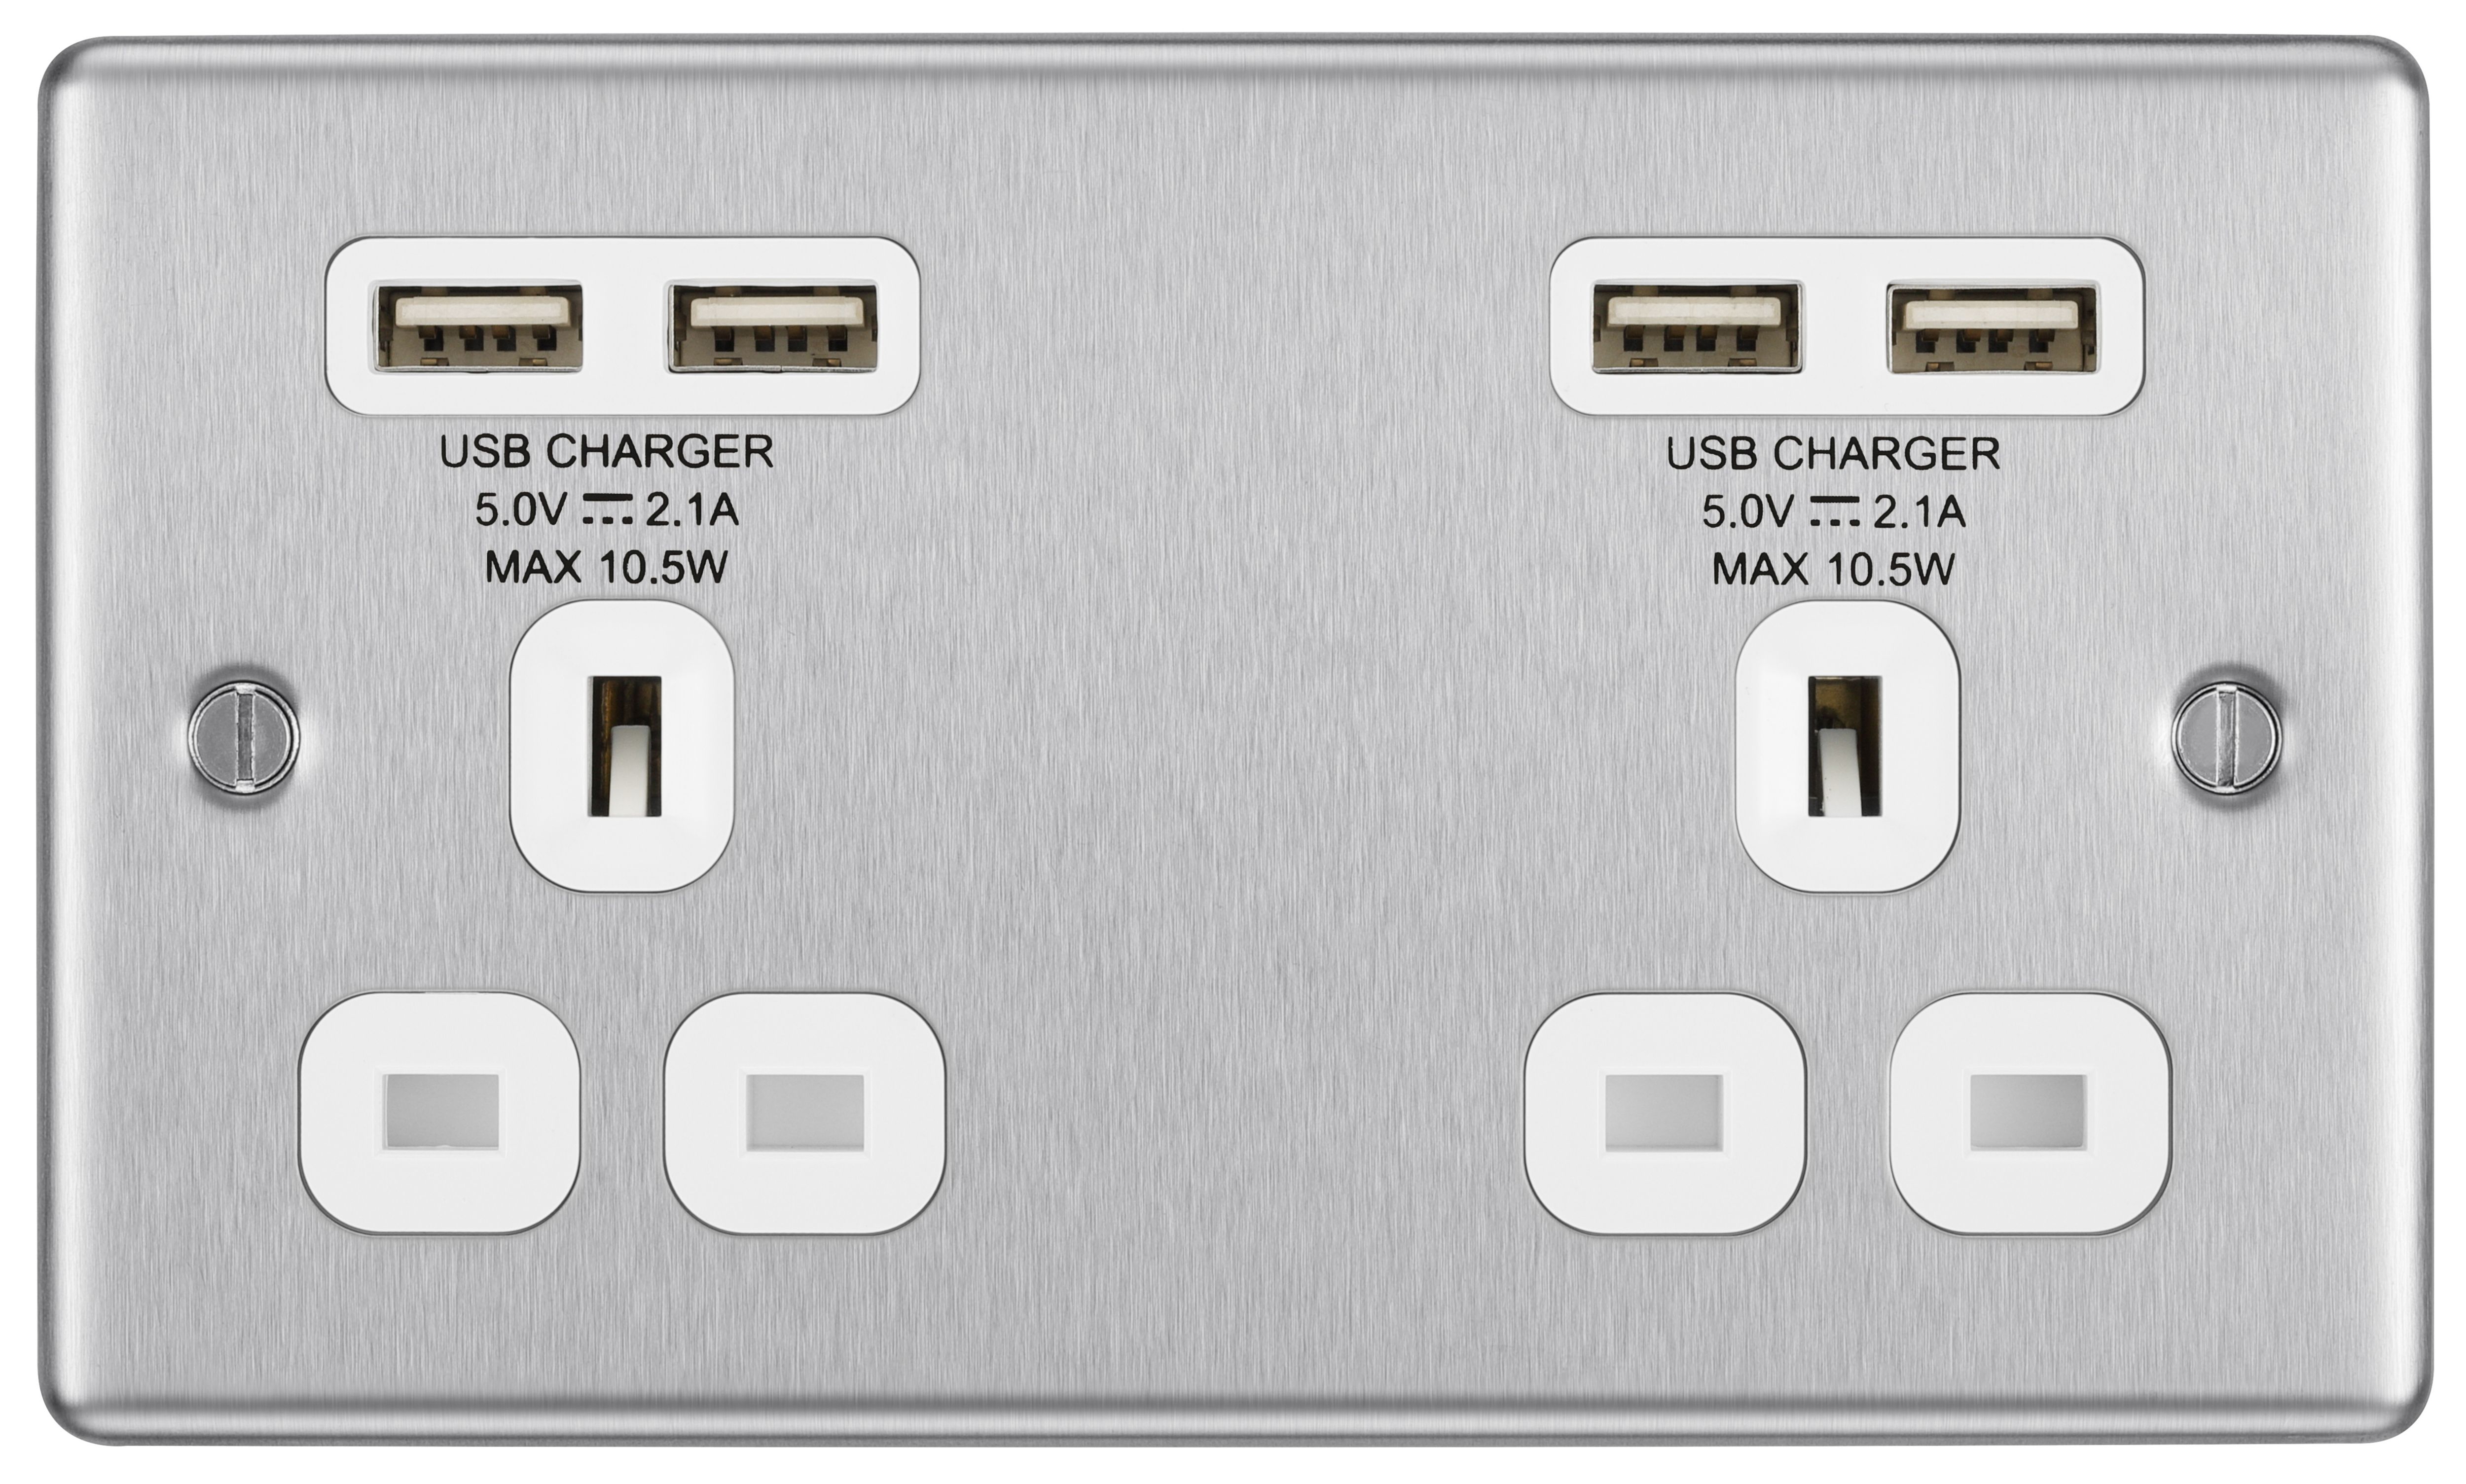 GoodHome Brushed Steel Double 13A Unswitched Socket with USB x4 & White inserts